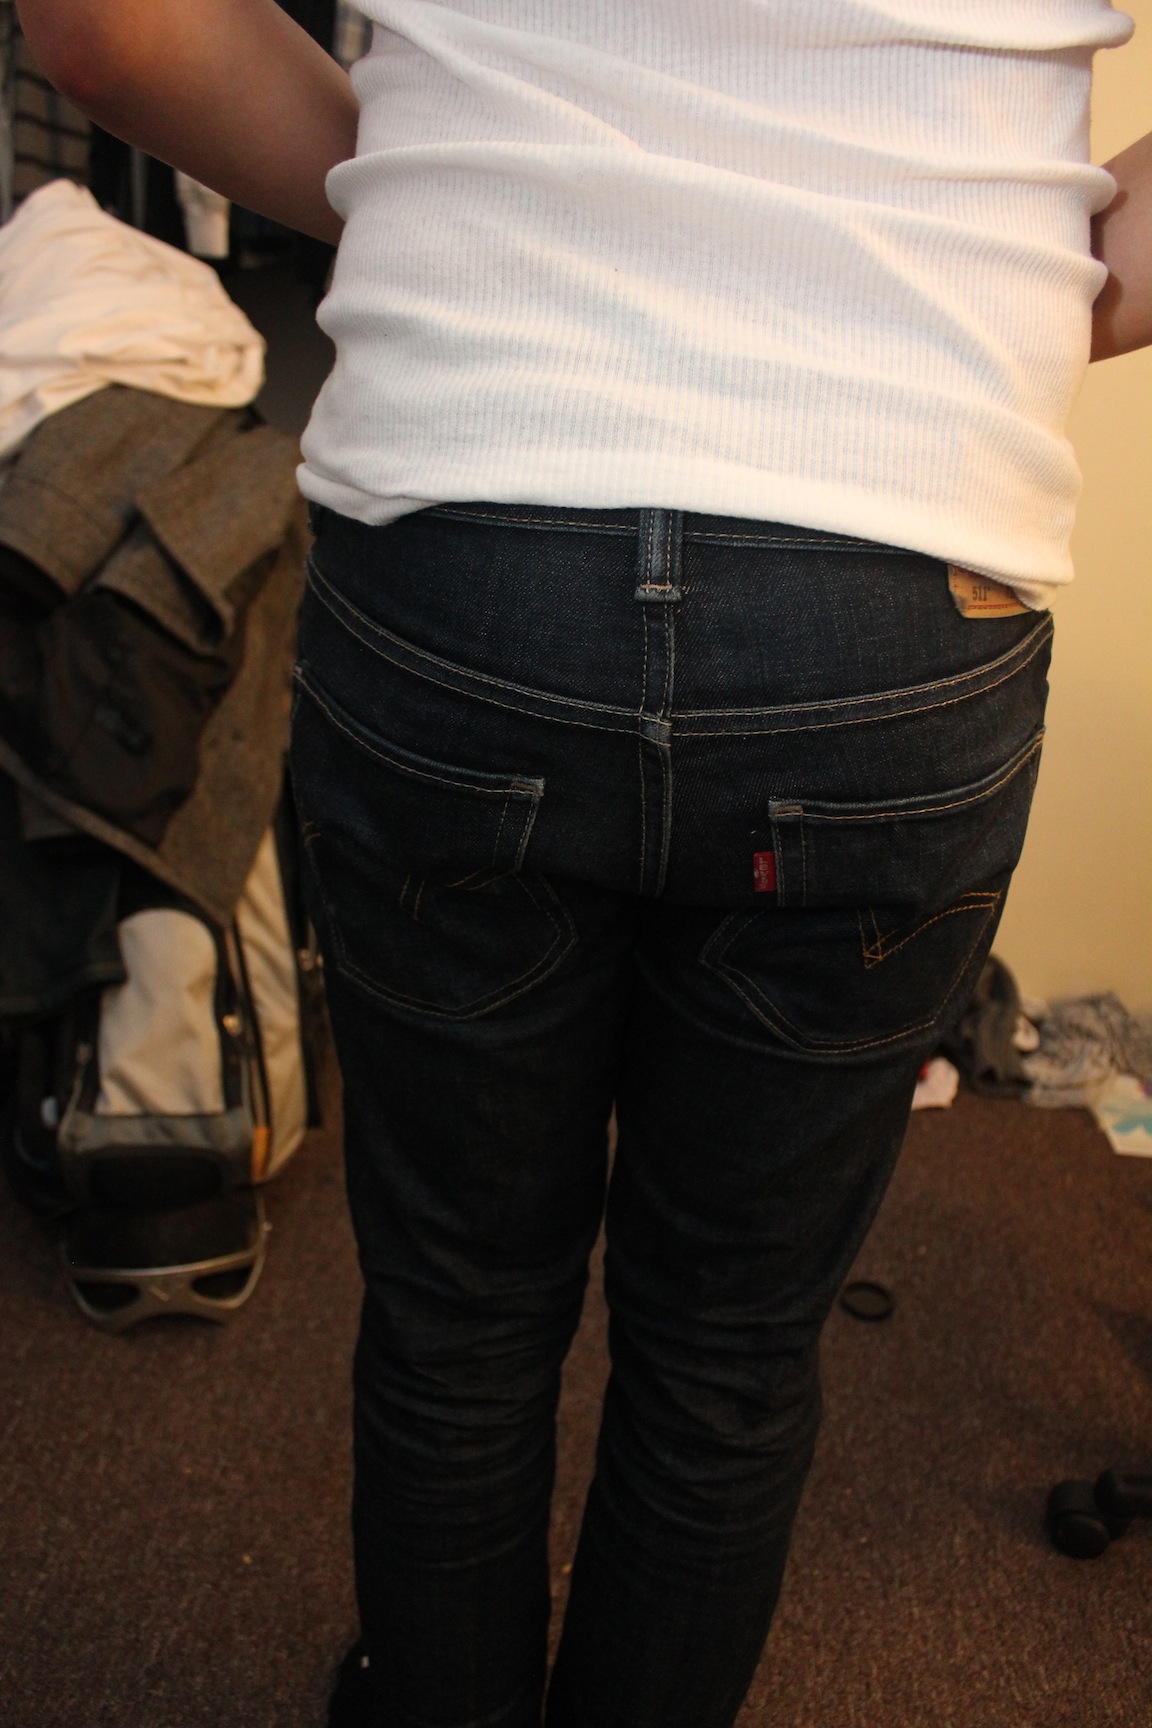 Jeans to fit a skinny guy with a big butt. | Page 2 | Styleforum